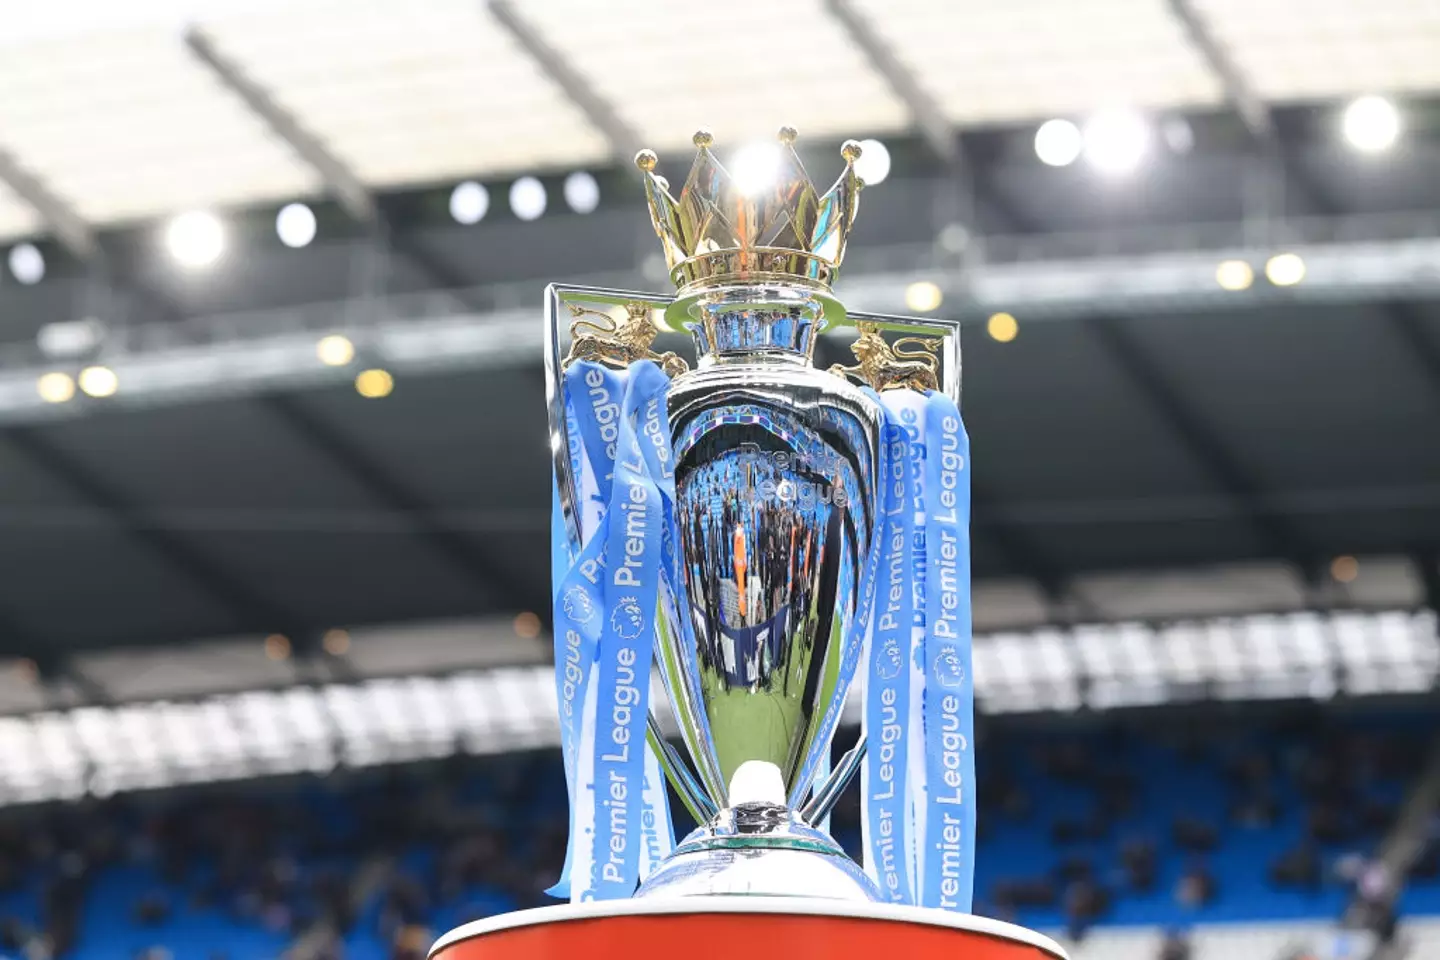 City could win a fourth consecutive Premier League title this season (Image: Getty)